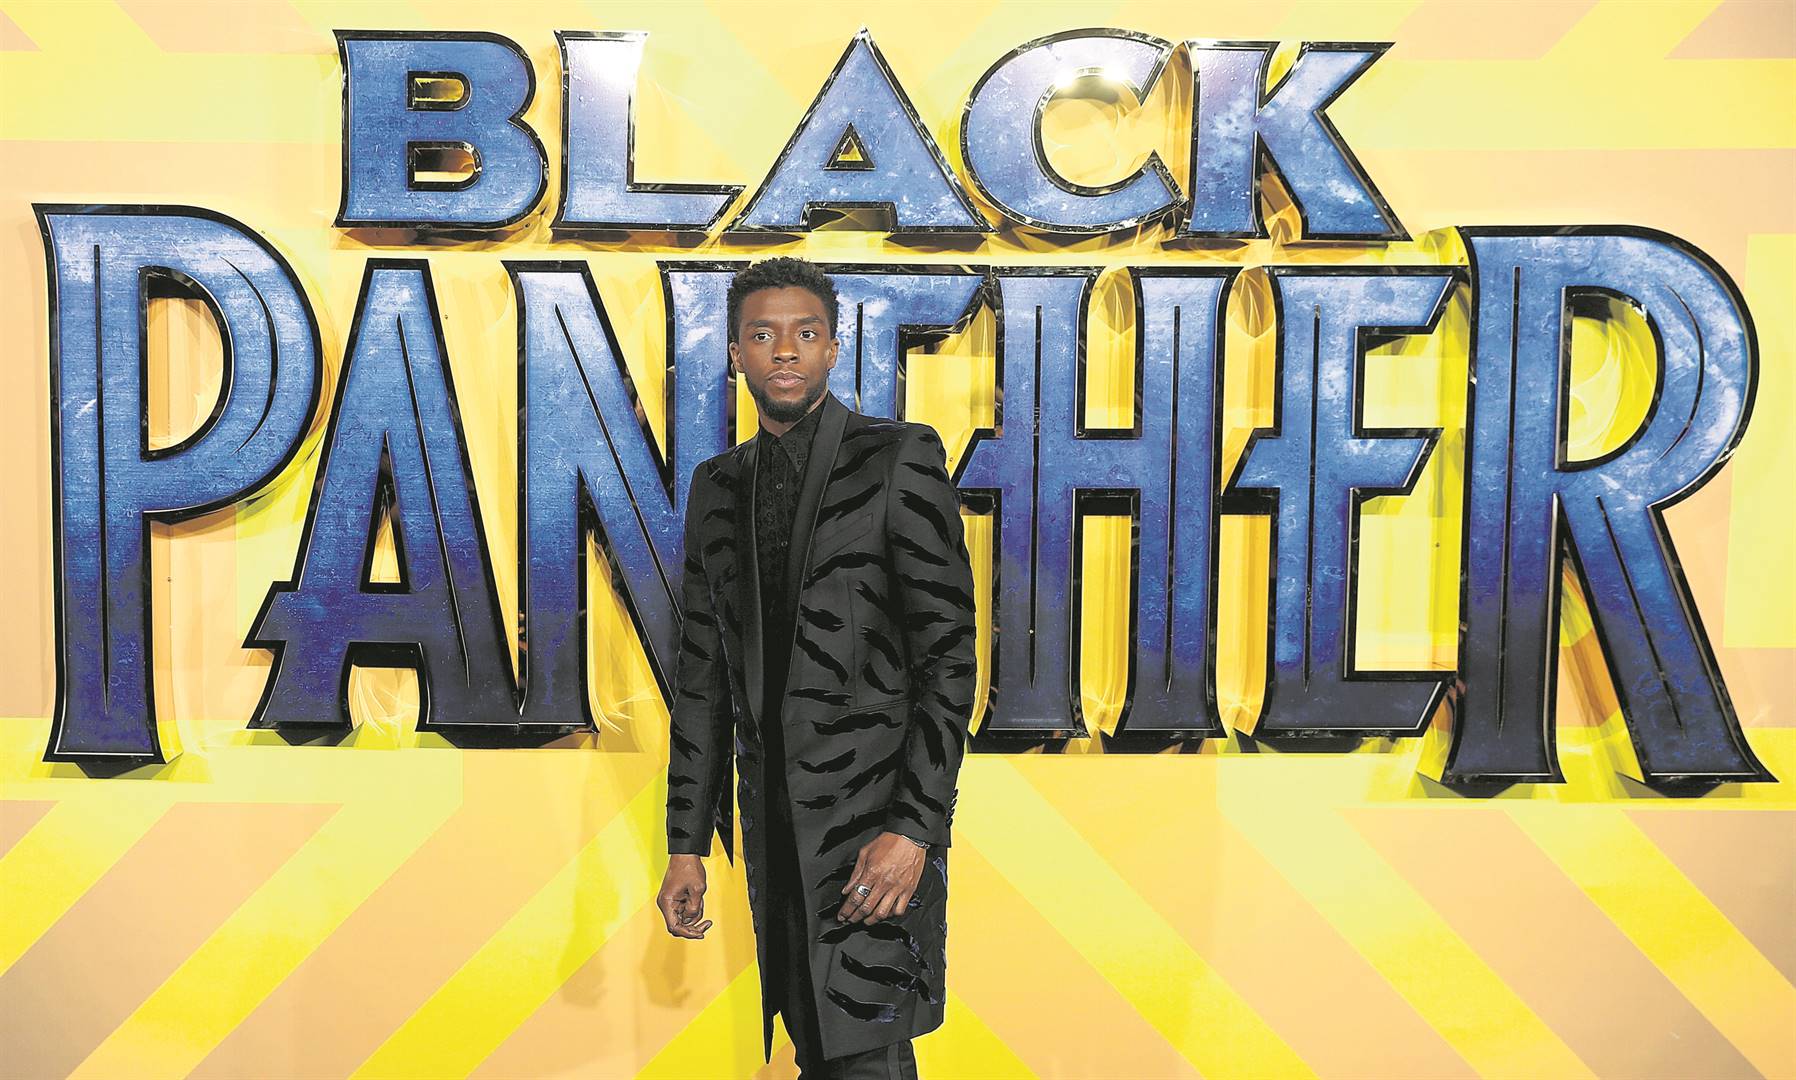 Chadwick Boseman had previously spoken about his special bond with